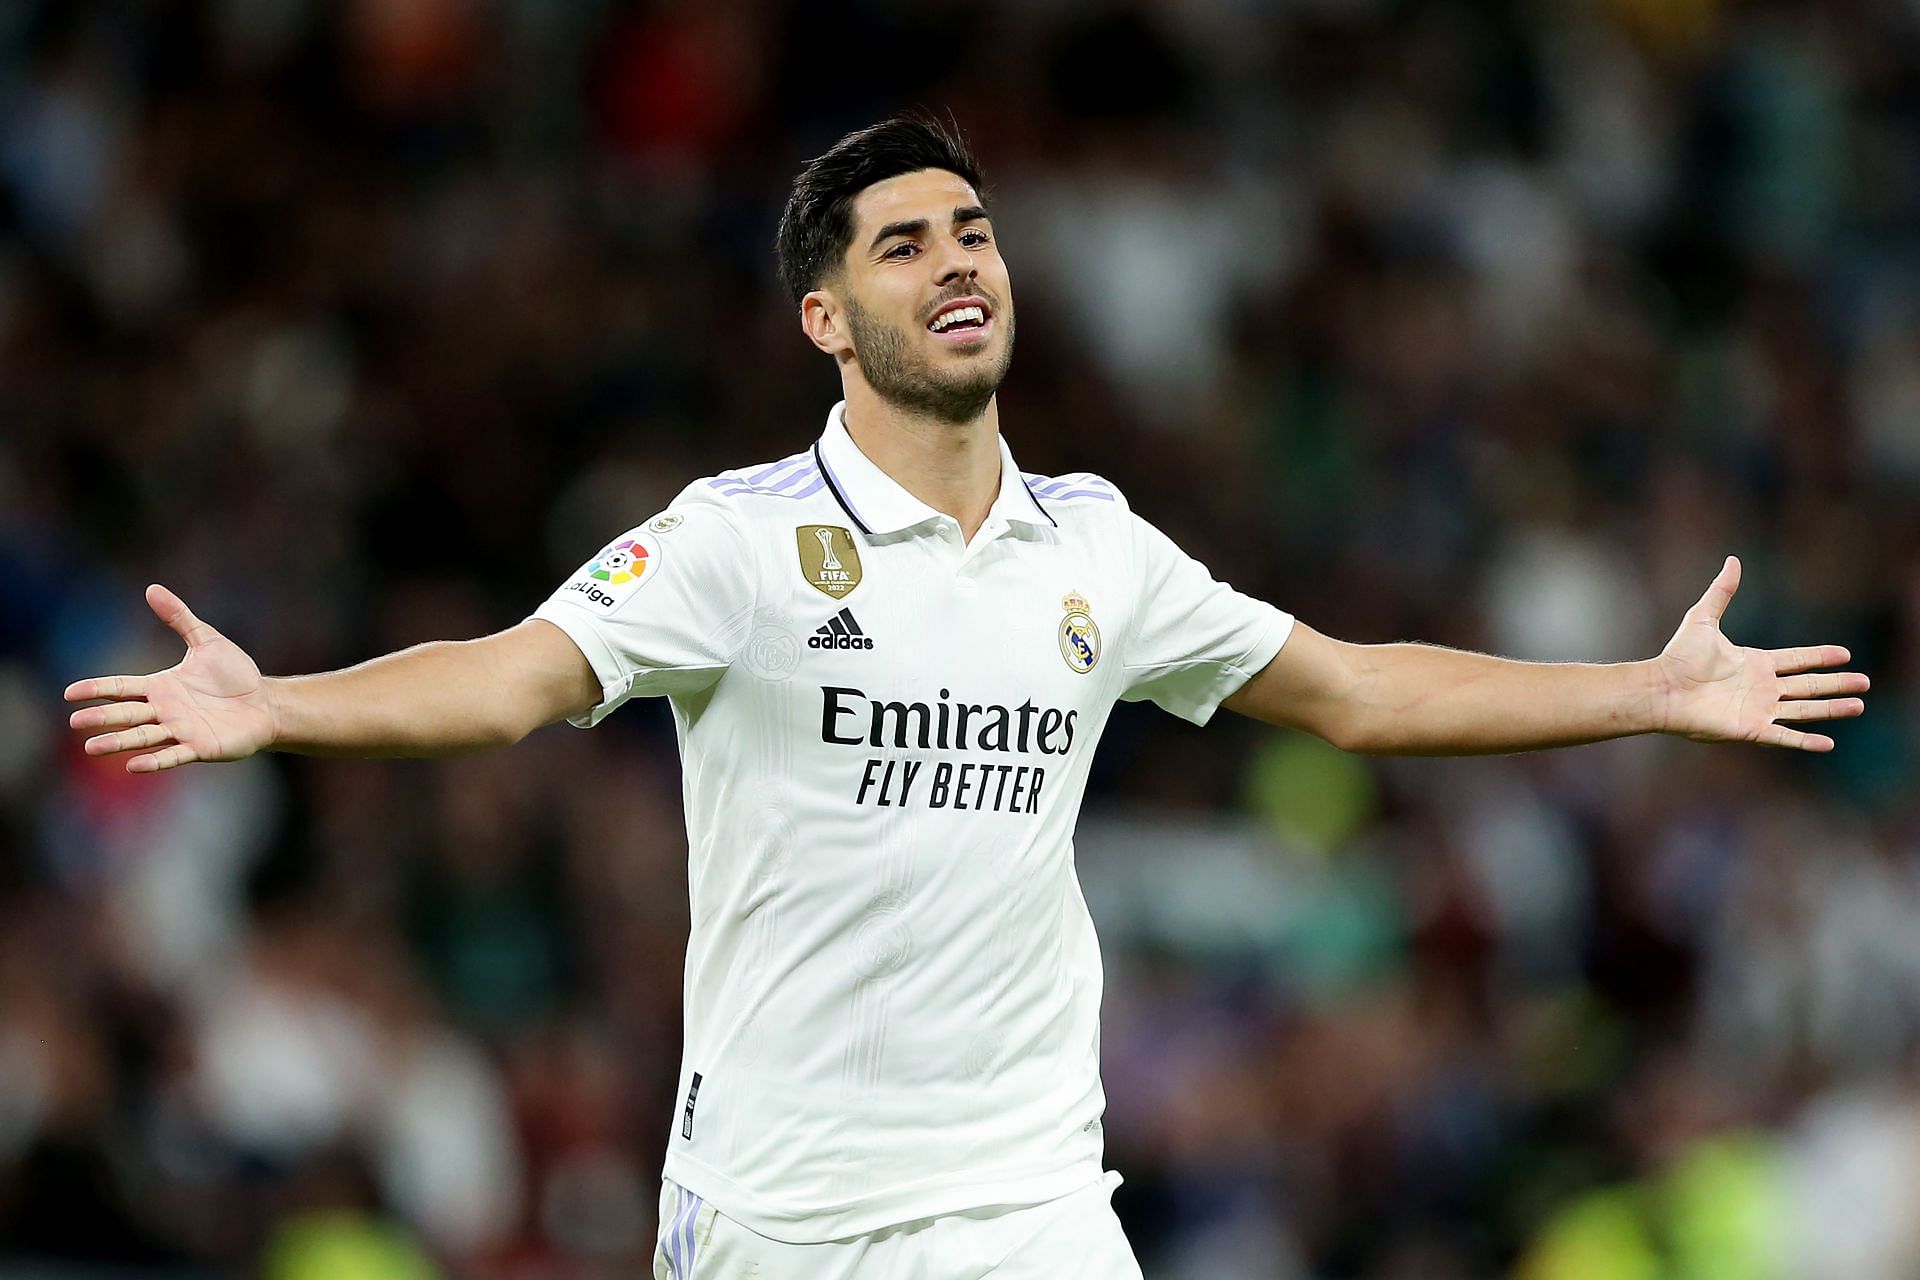 Marco Asensio is likely to arrive at the Parc des Princes this summer.